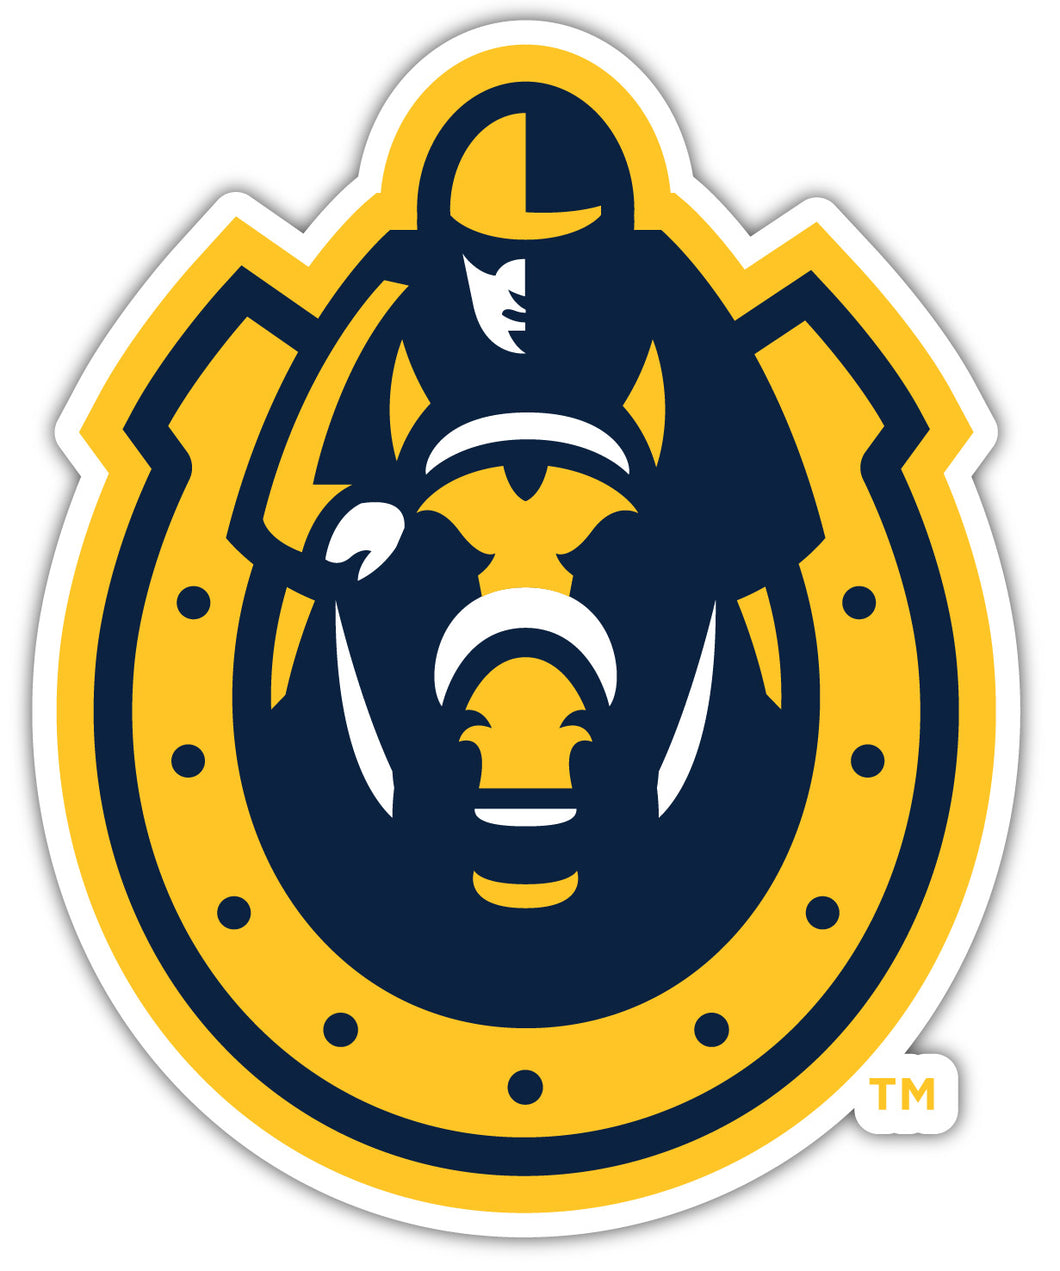 Murray State University 4 Inch Vinyl Decal Magnet Officially Licensed Collegiate Product